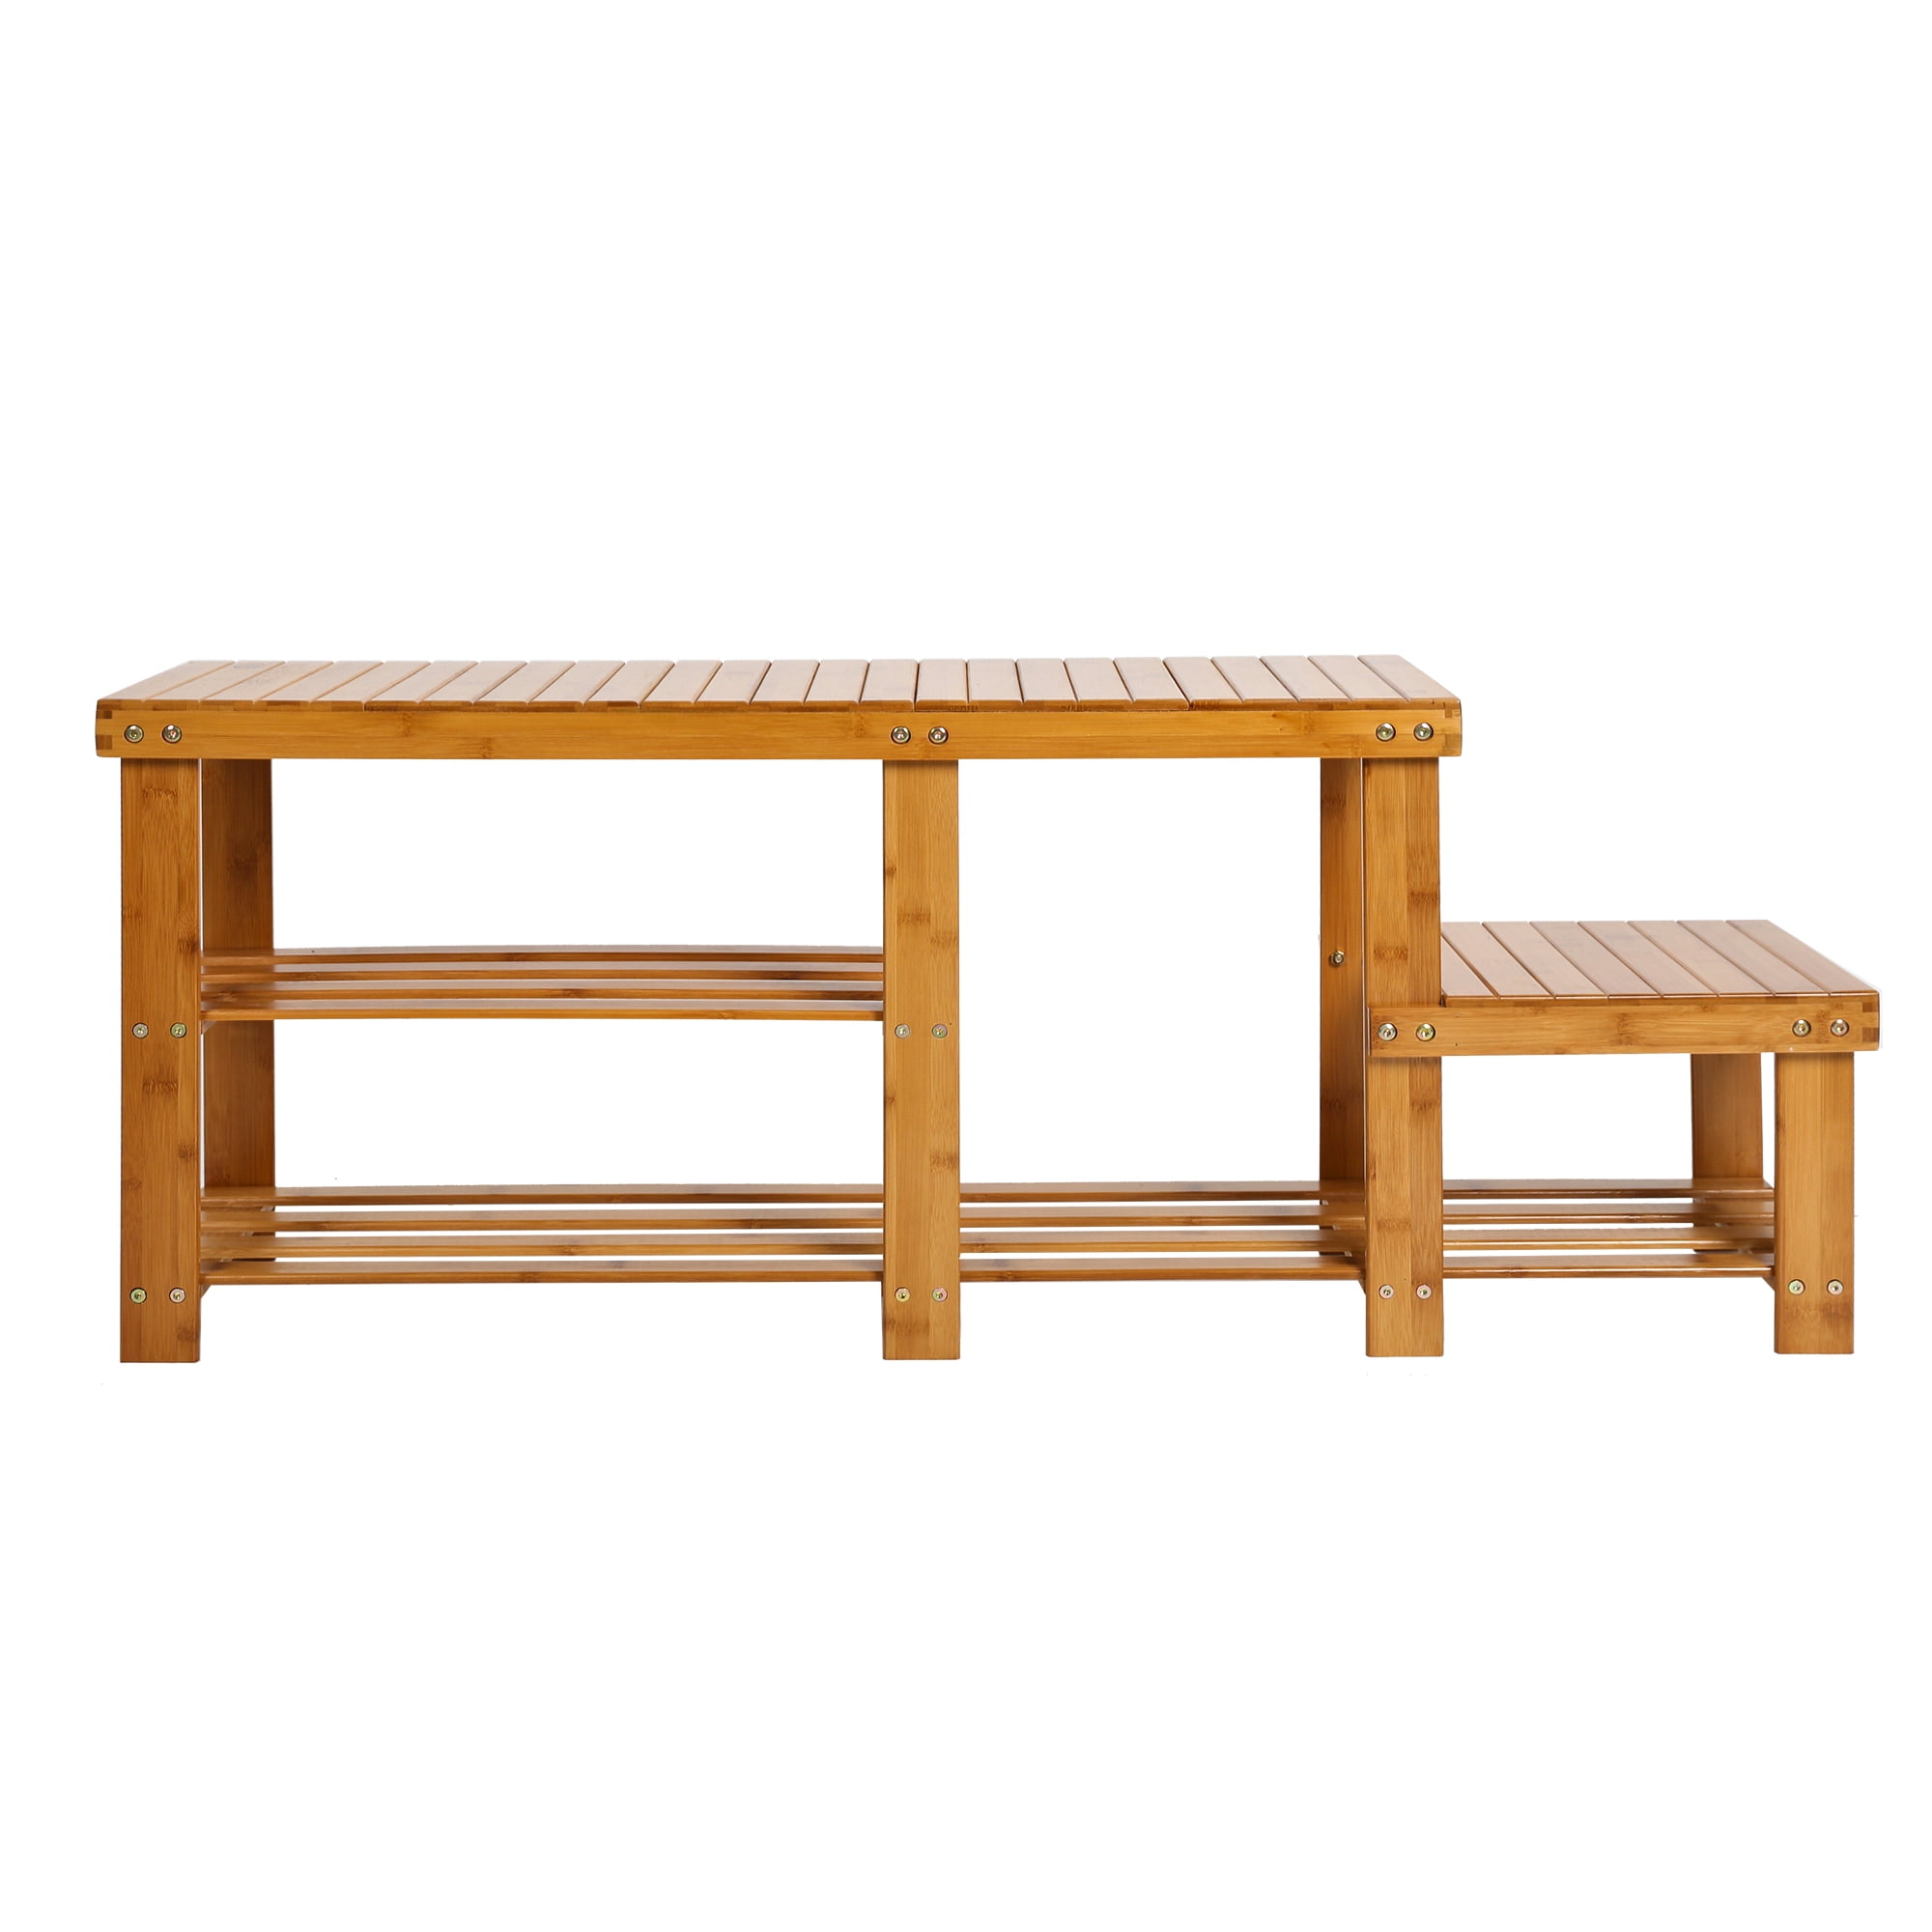 Mudroom Royal Brands Bamboo Shoe Rack Bench 2 Tier Organizing Rack Hallway or Bedroom Hallway or Bedroom Perfect for Entryway Bench Seat 23.5x11.5x18 23.5x11.5x18 Closets